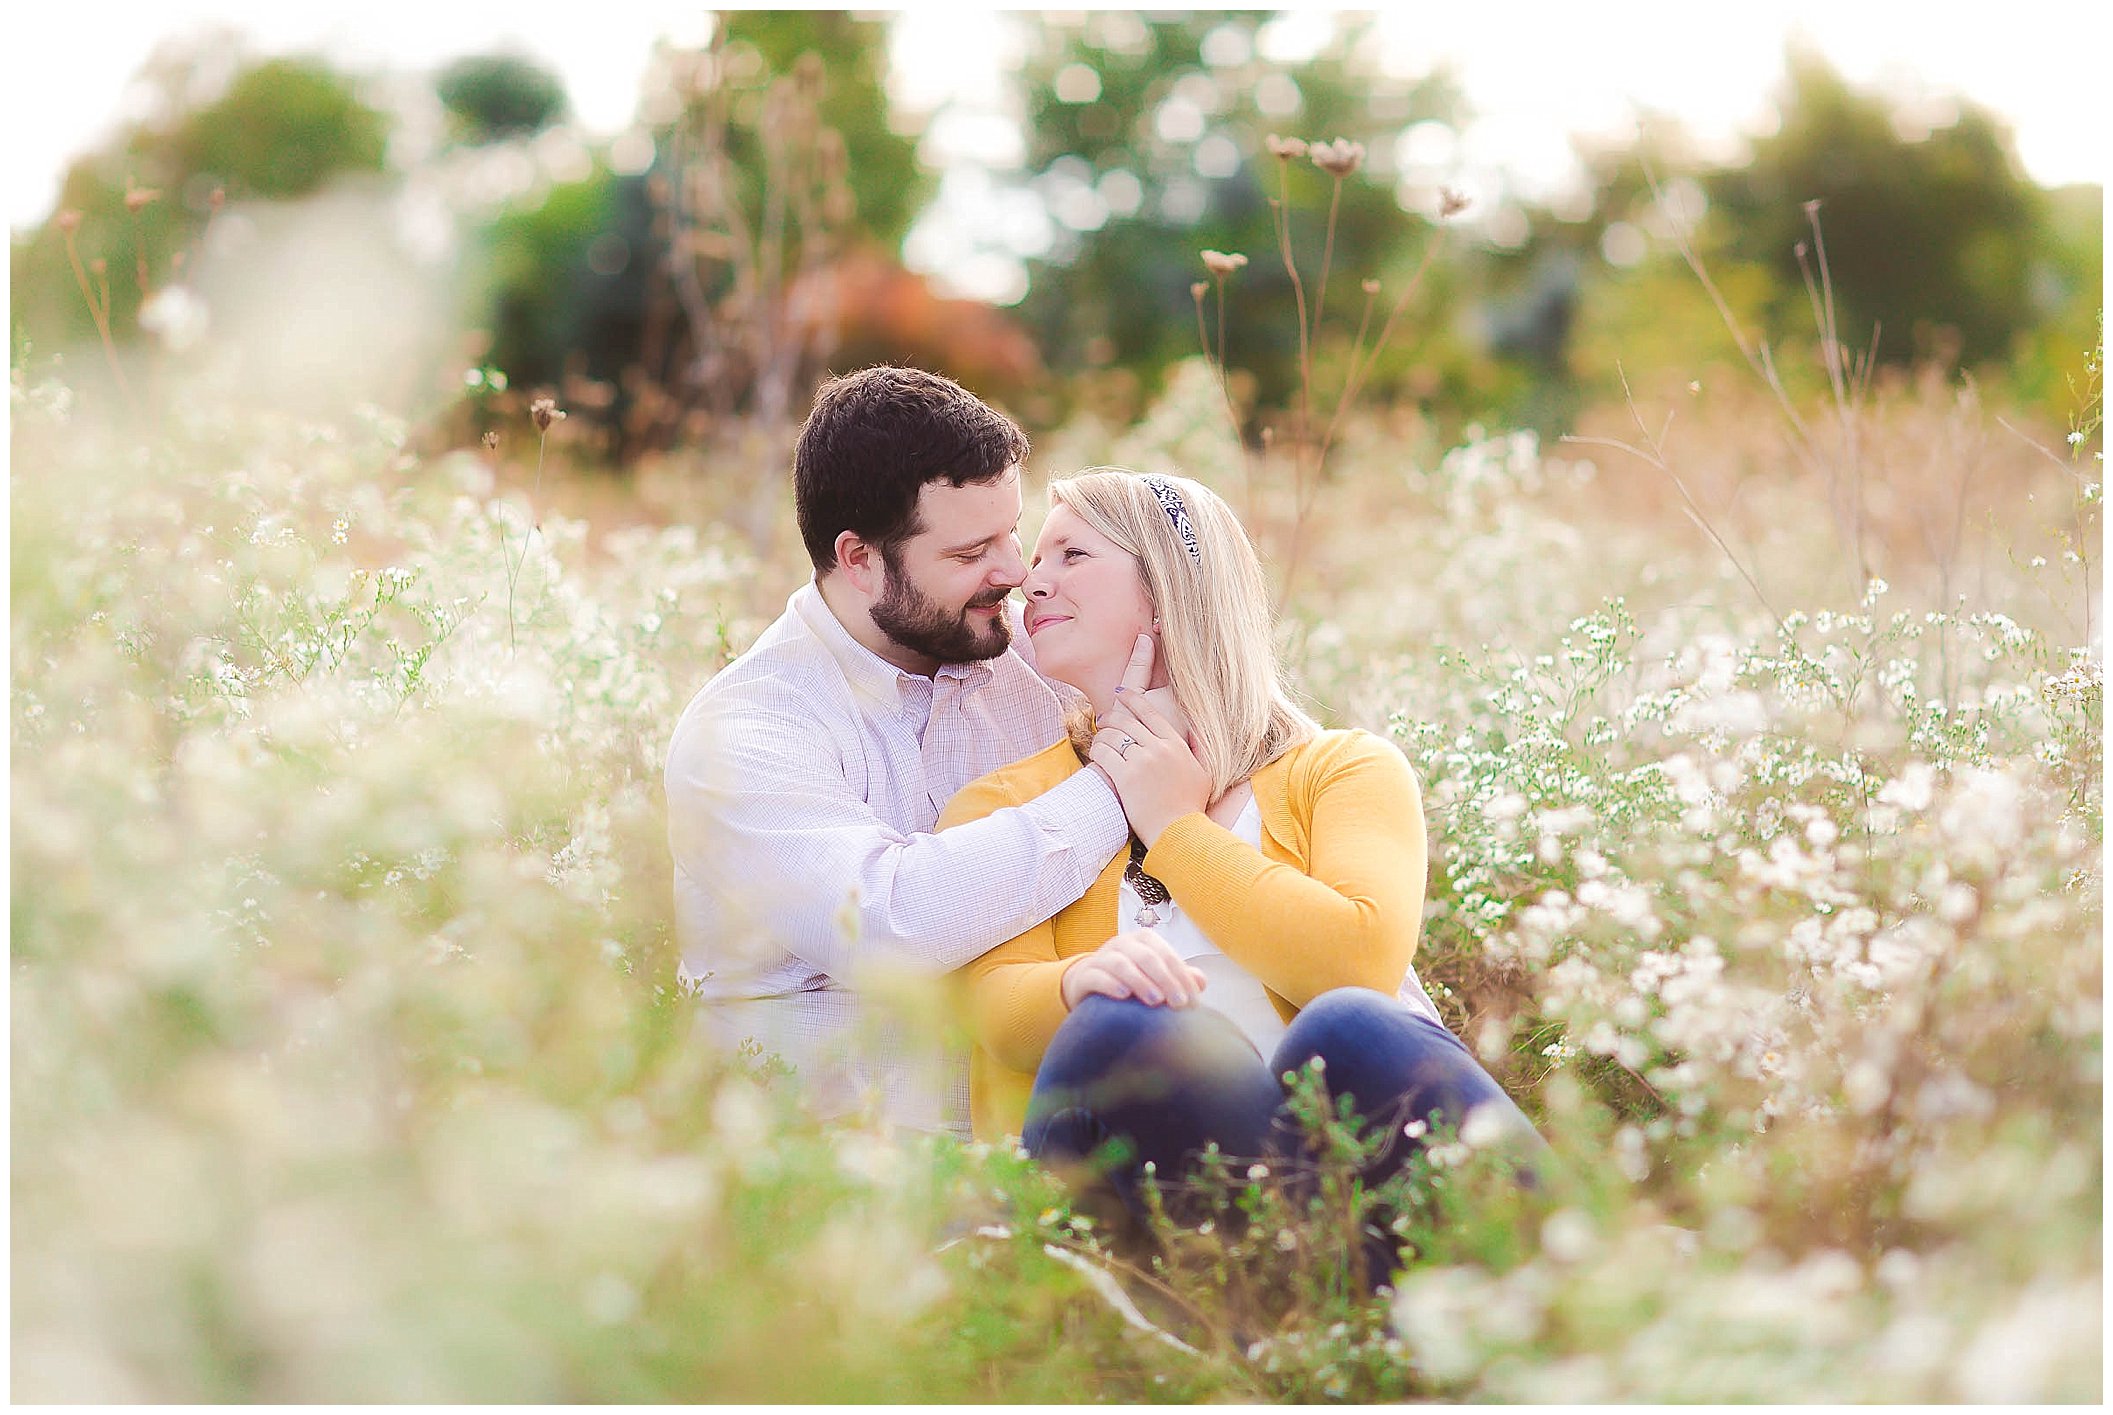 Sunshine filled engagement session in a field of wildflowers, Fort Wayne Indiana Wedding Photographer_0008.jpg